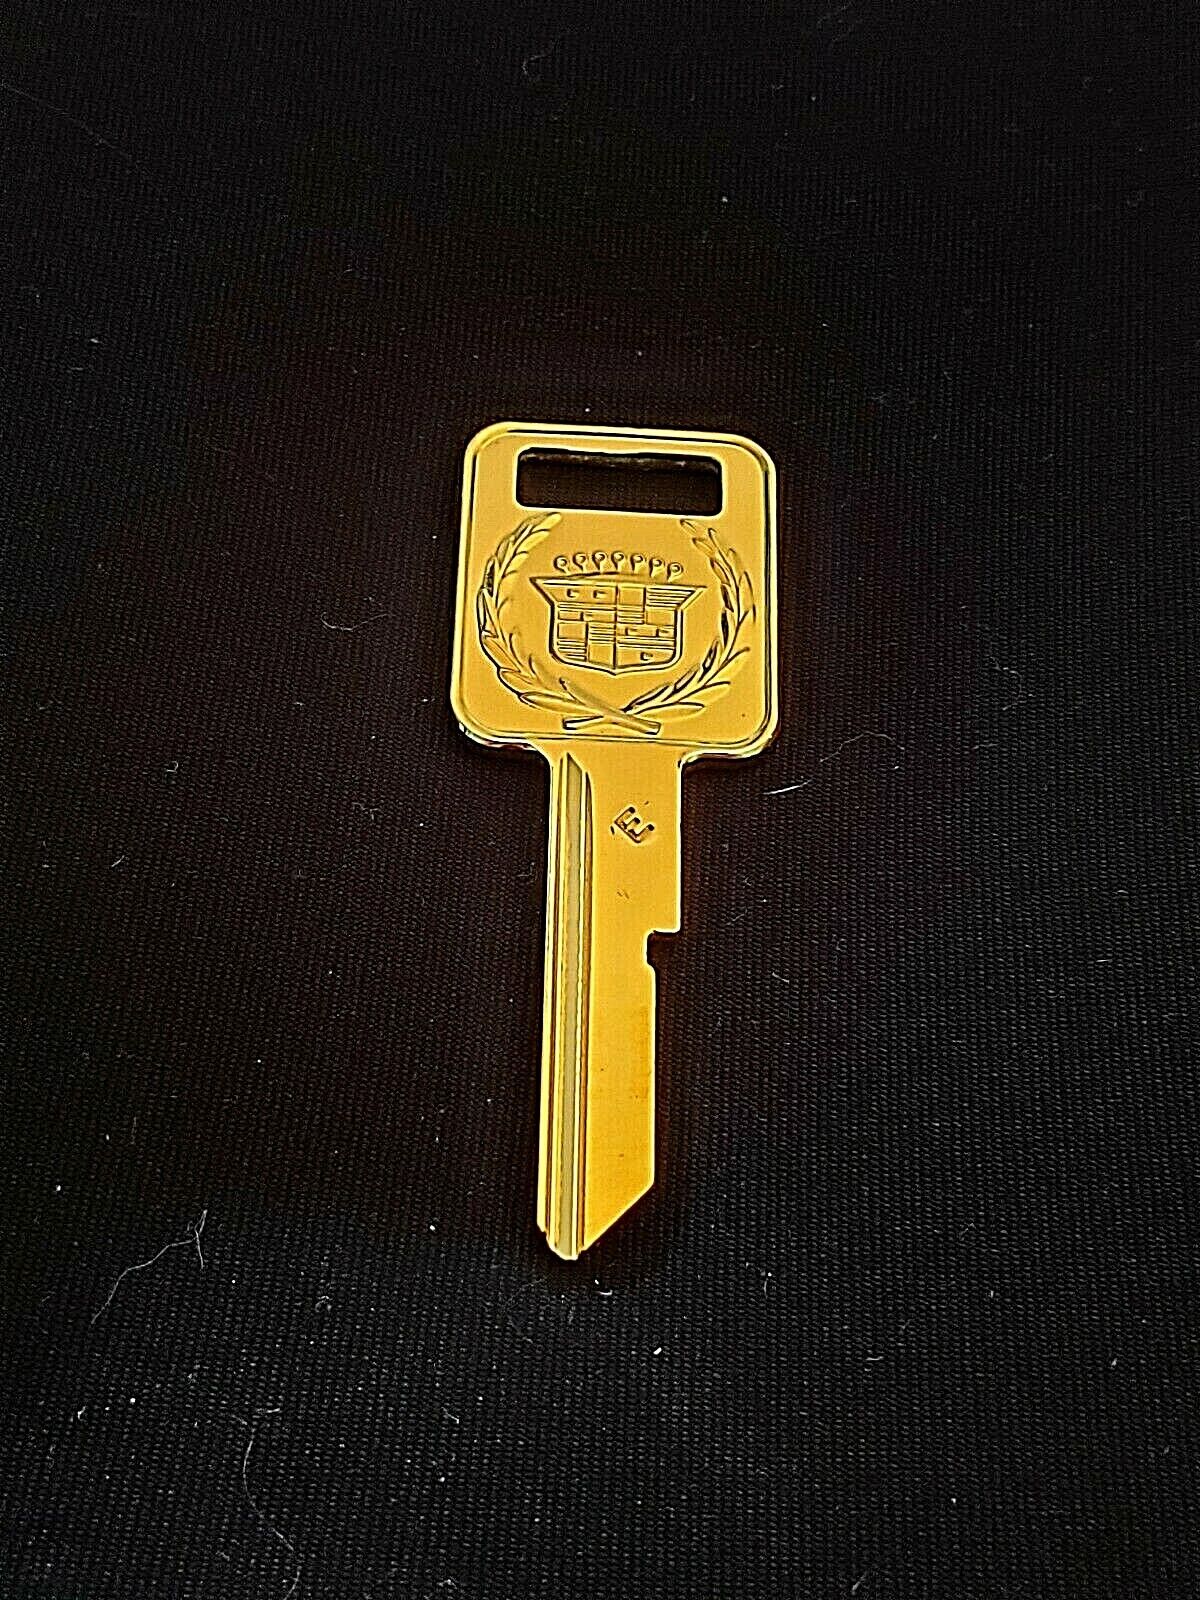 Rare Cadillac Gold Key - \'E\' Ignition for 1969, 1973, 1977, 1981 and some \'91-92